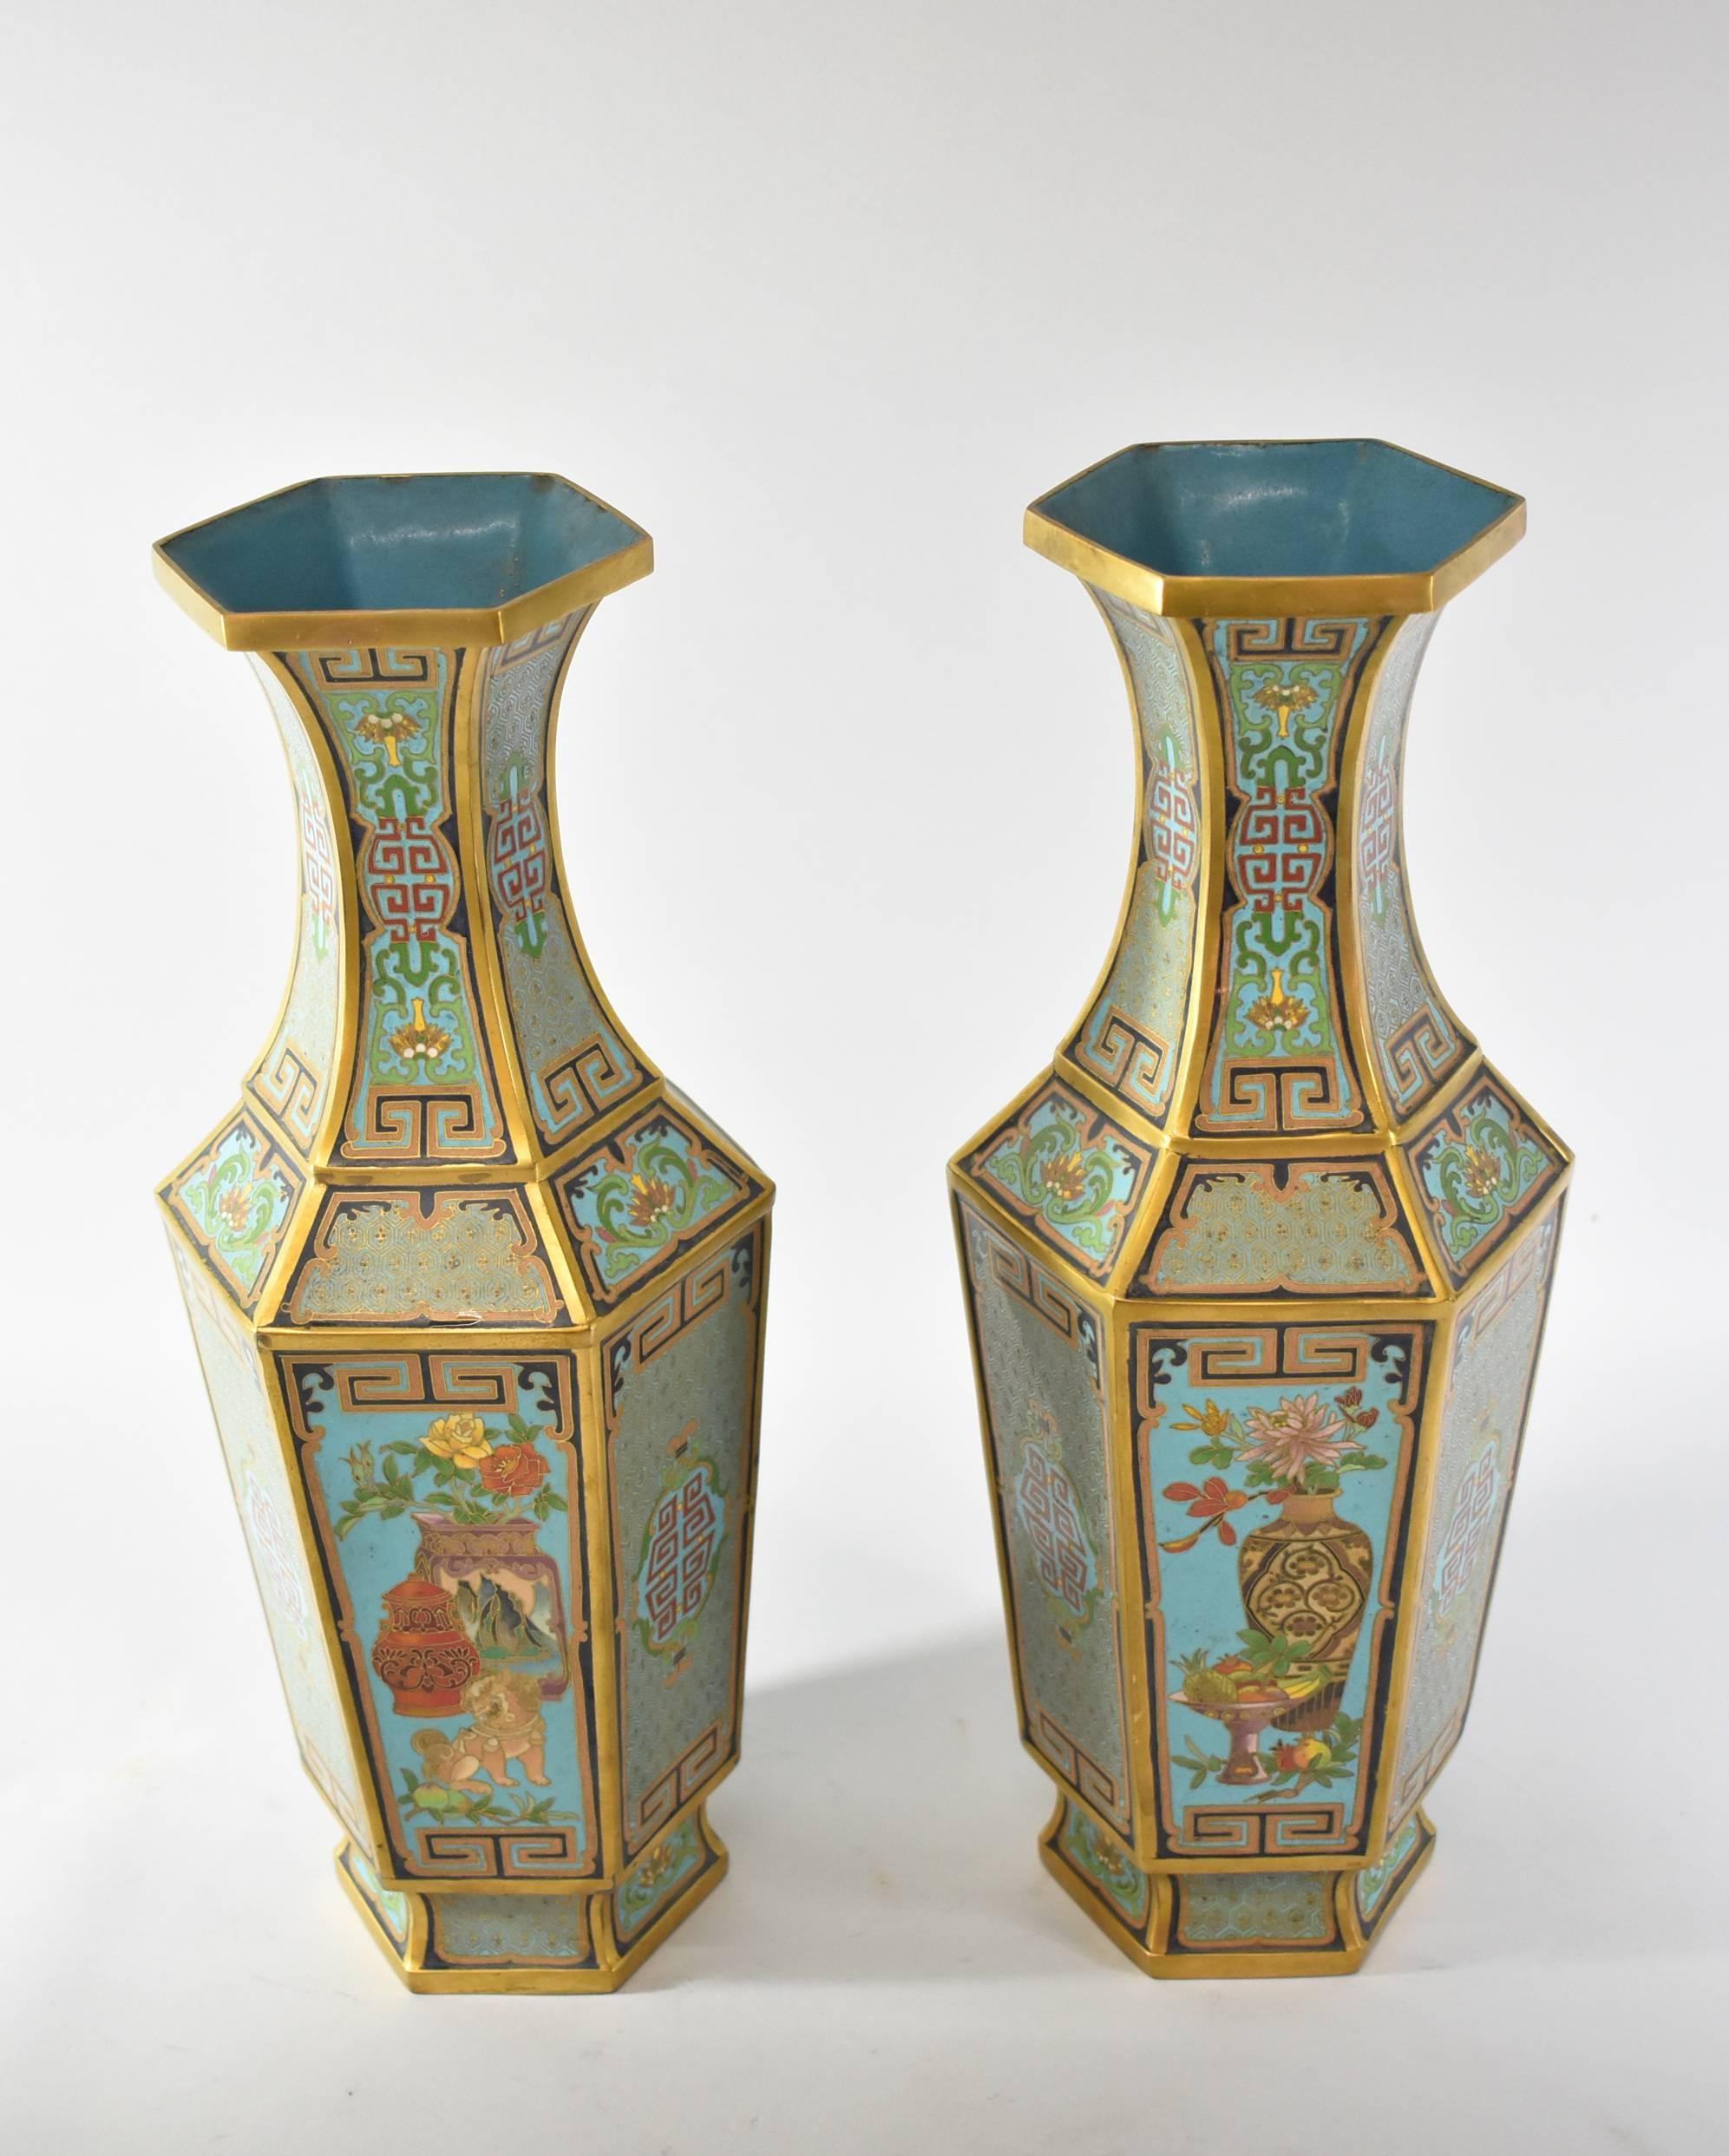 Chinese Export Pair of Antique Cloisonné Gold, Turquoise Hexagon Vases